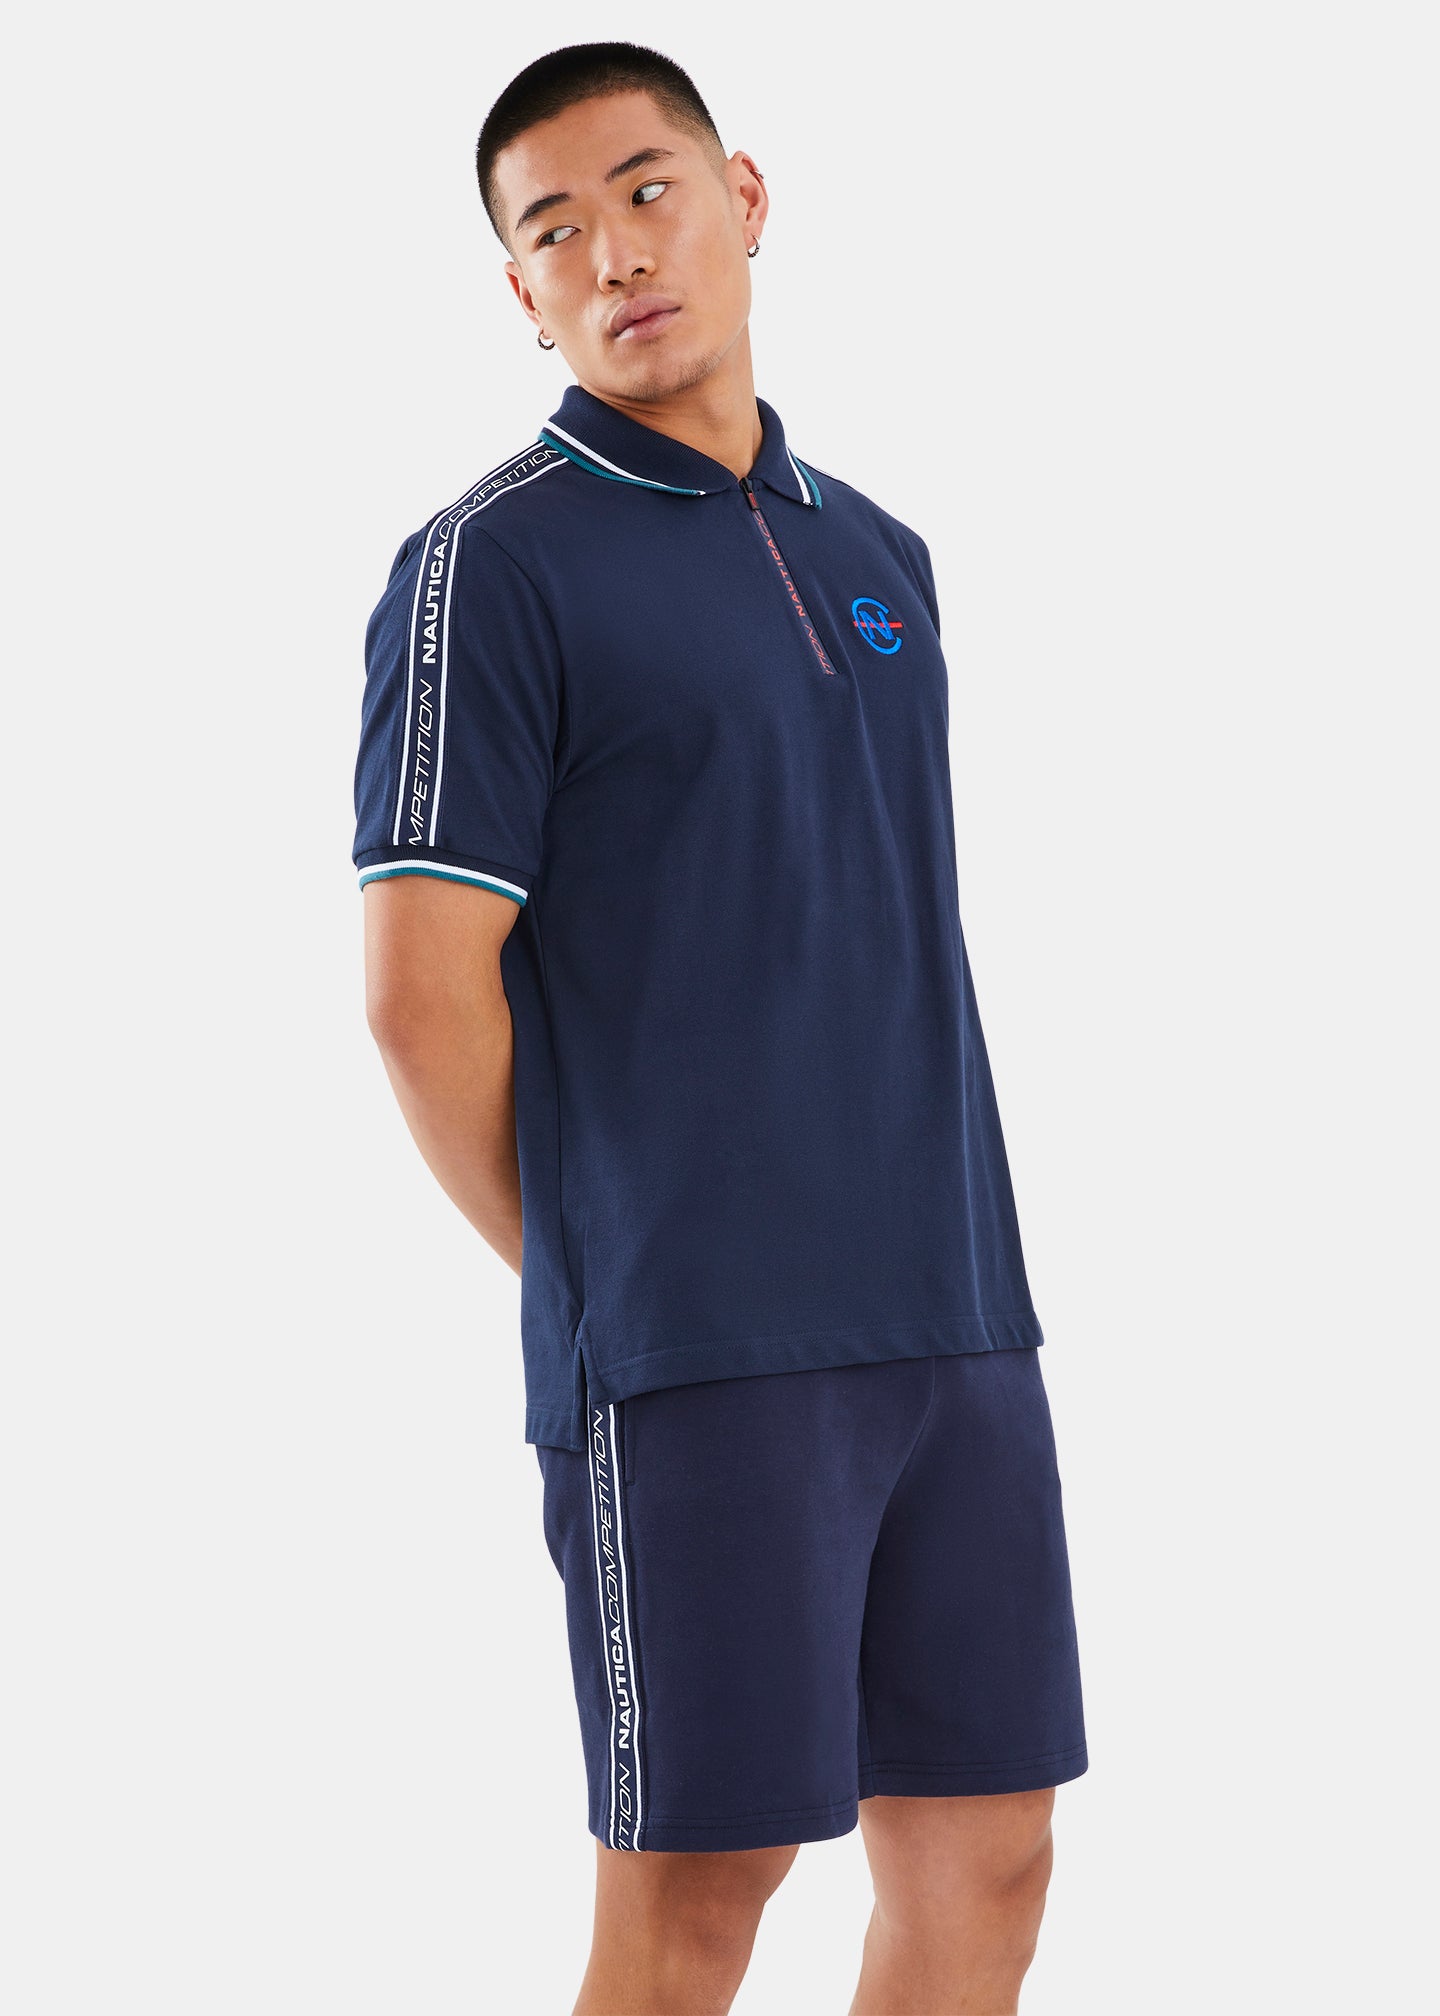 Nautica Competition Aster 1/4 Zip Polo Shirt - Dark Navy - Front